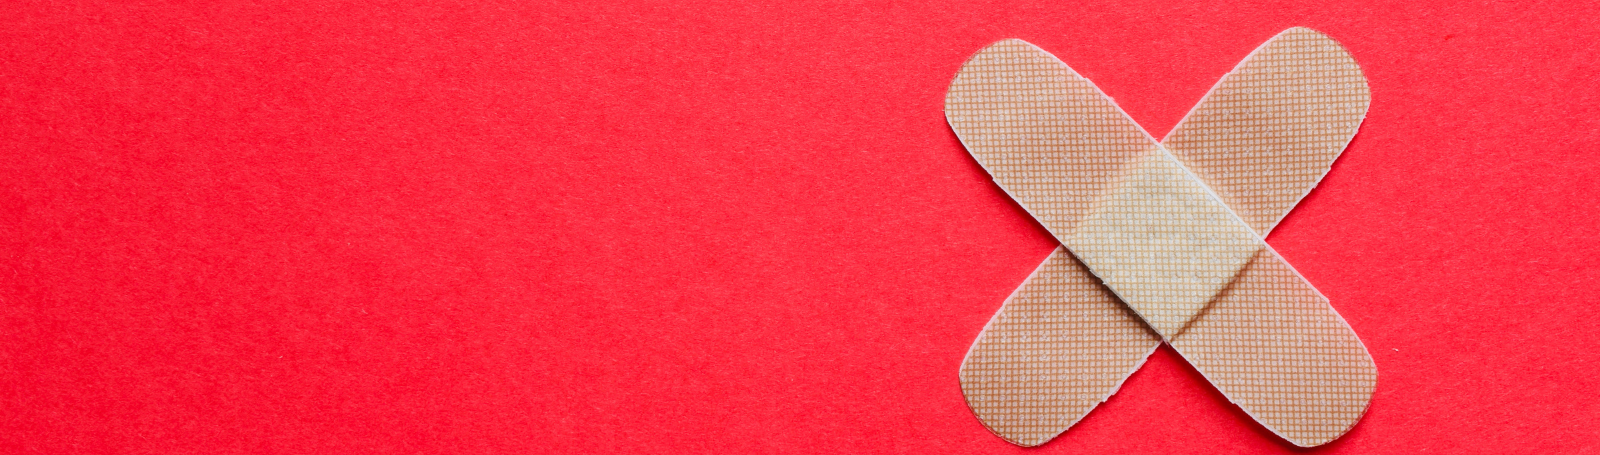 Two band-aids on a red background